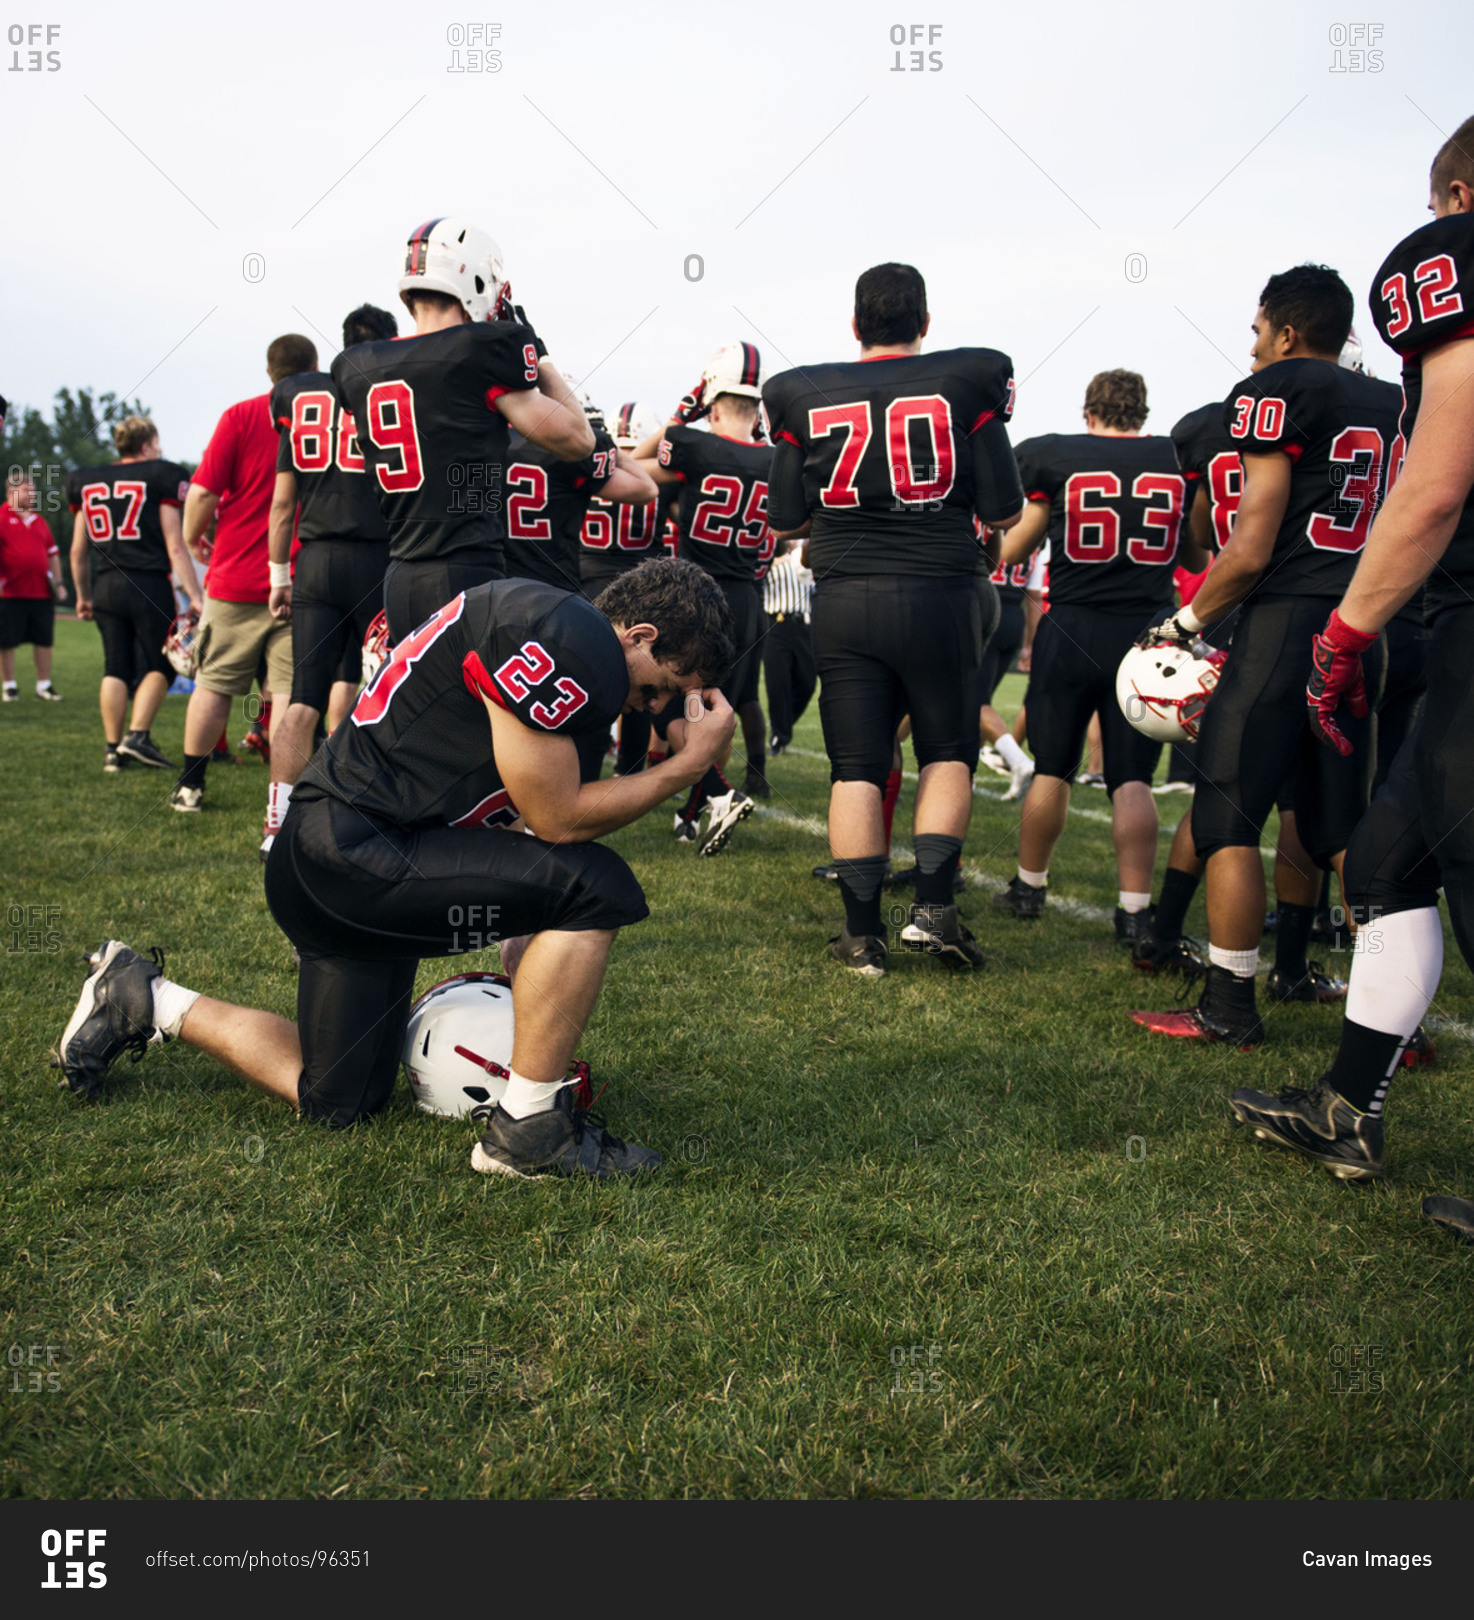 Football player praying before the game